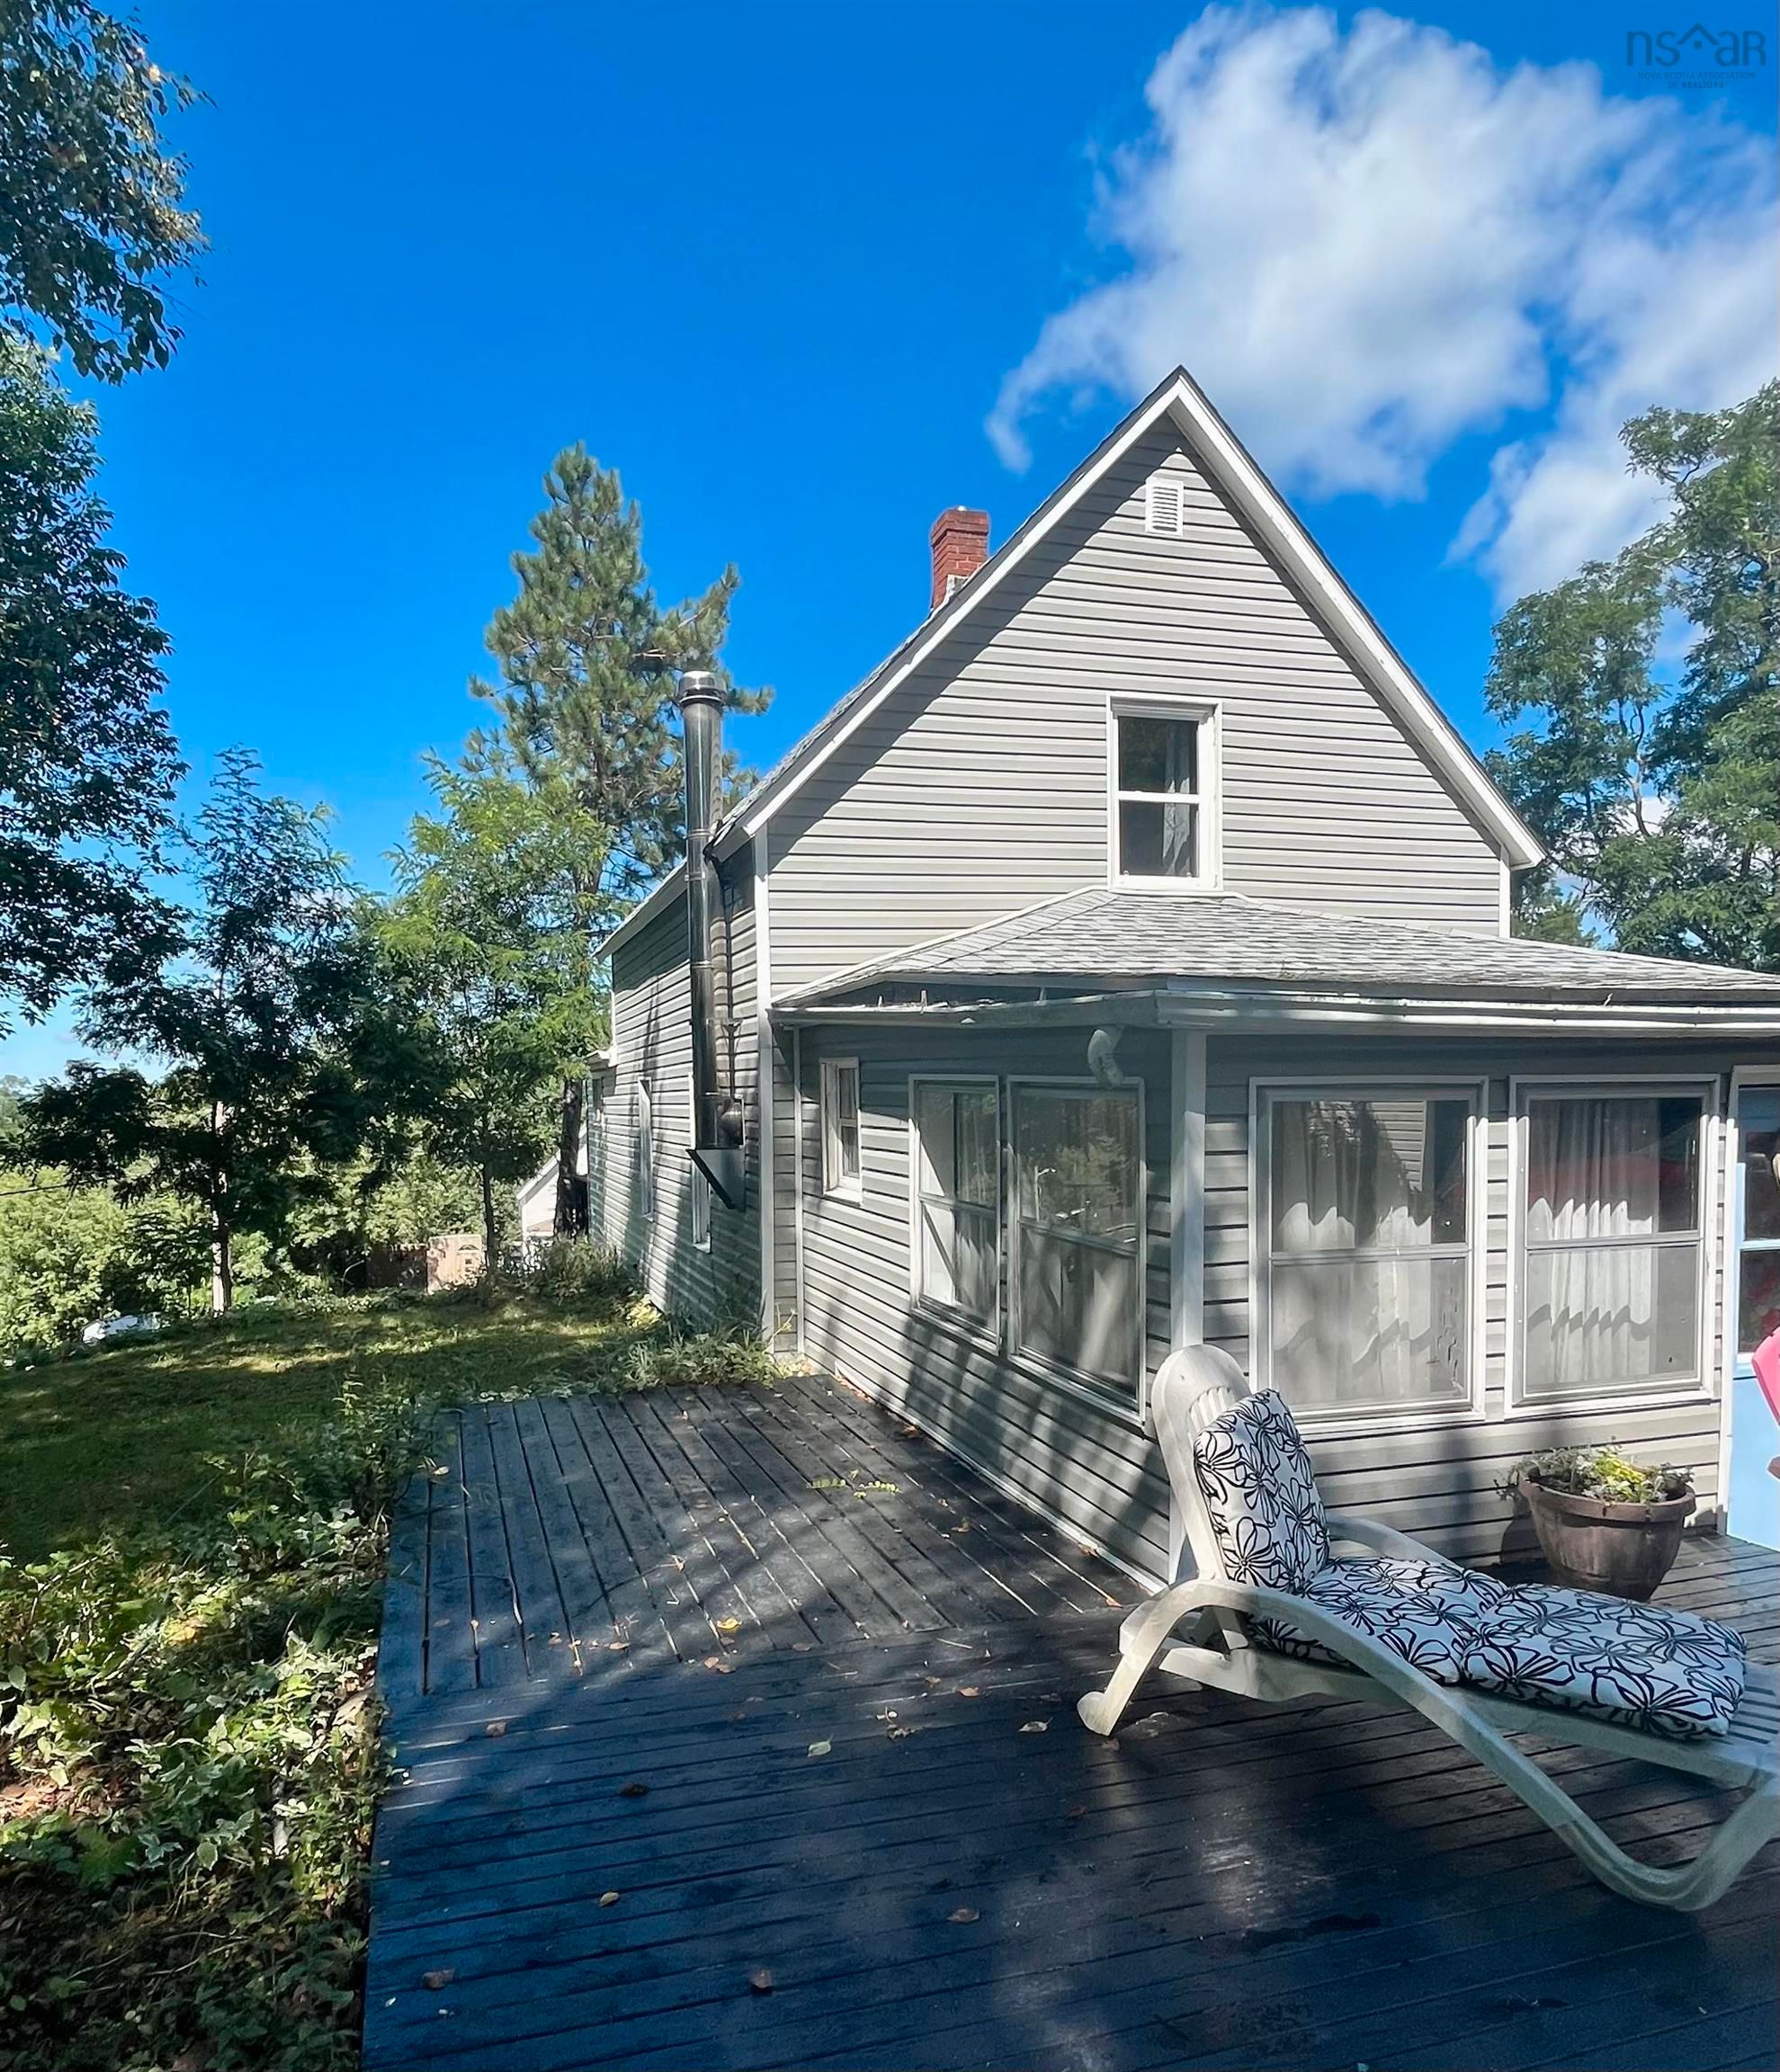 Main Photo: 22 Hillside Road in Hillside: 108-Rural Pictou County Residential for sale (Northern Region)  : MLS®# 202220476